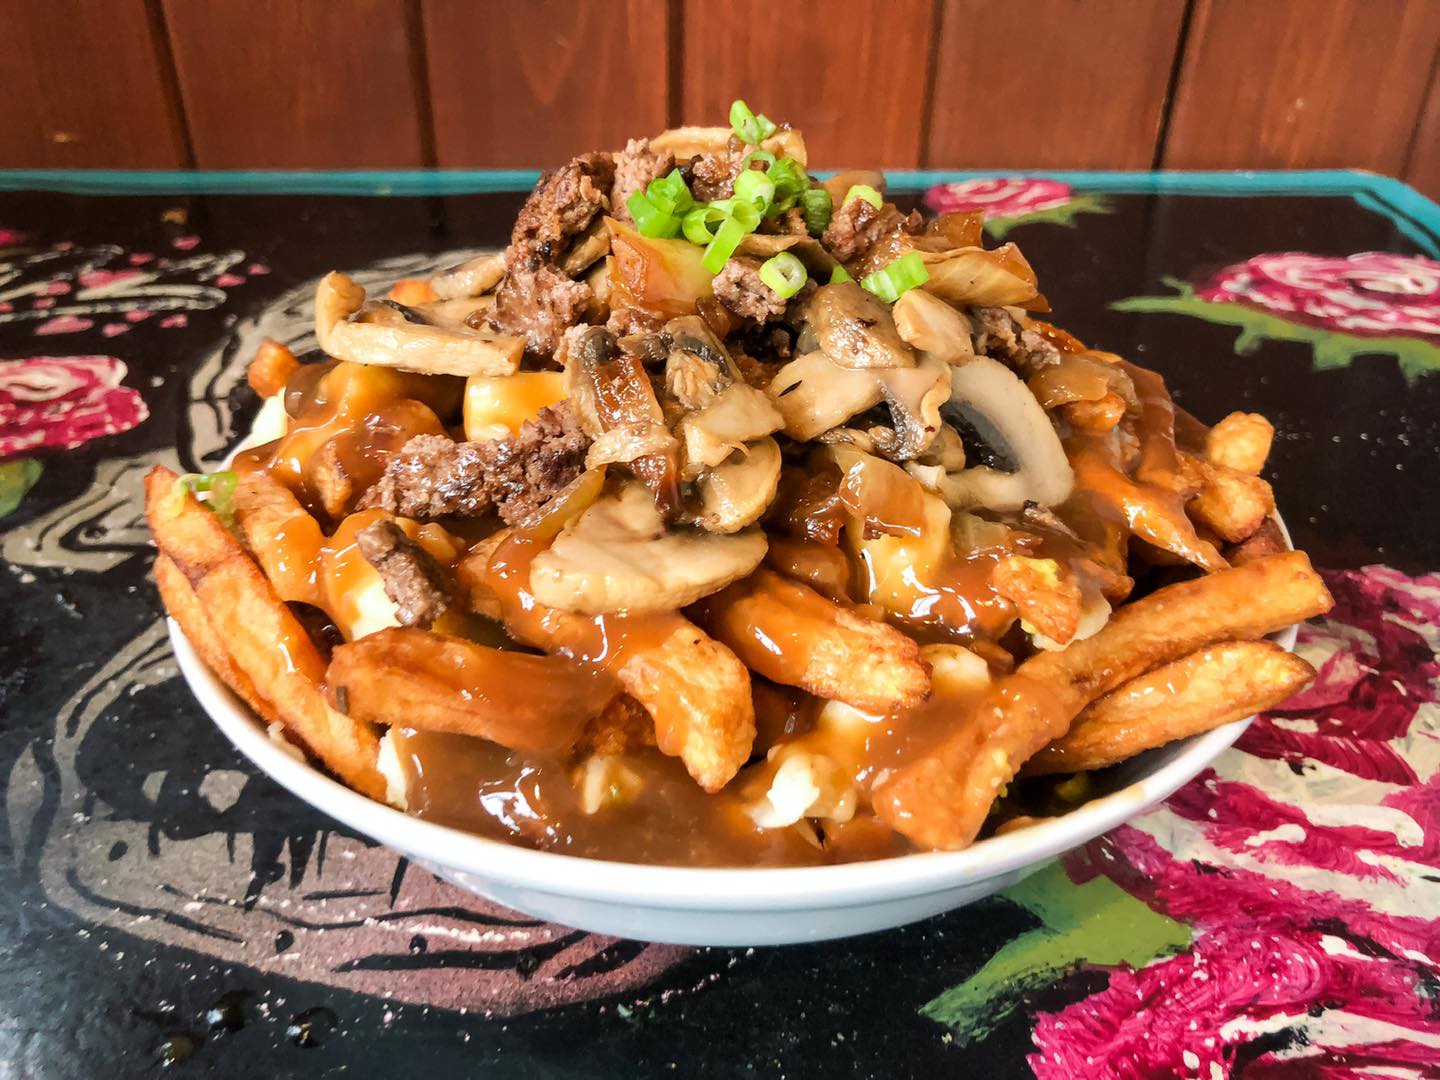 Poutine with some additional toppings such as mushrooms.